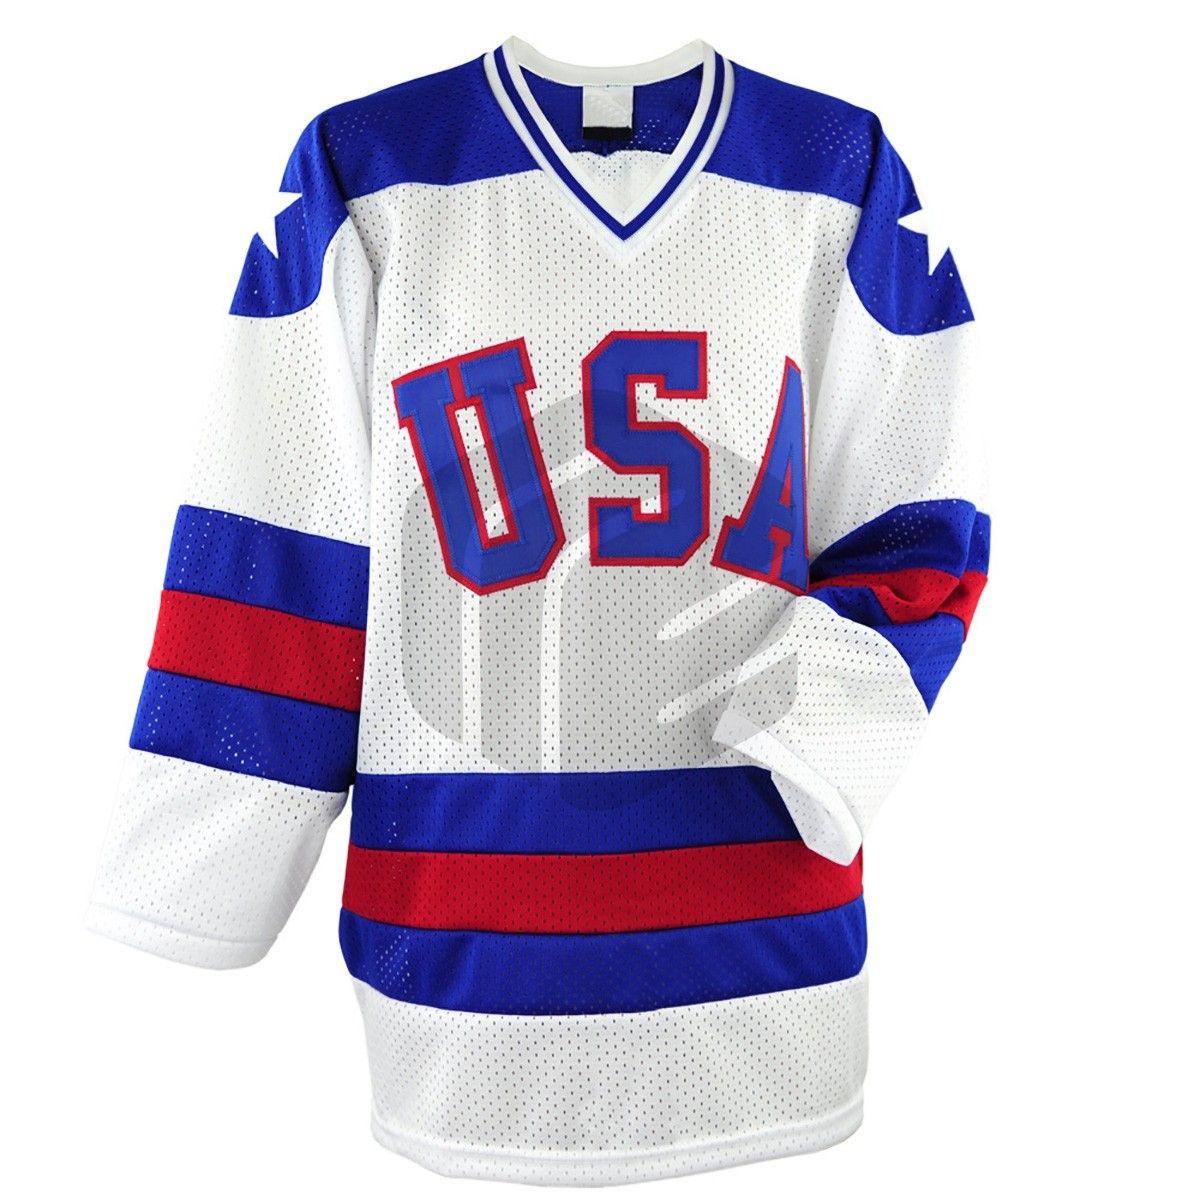 Hockey Jersey to Remember the Glory